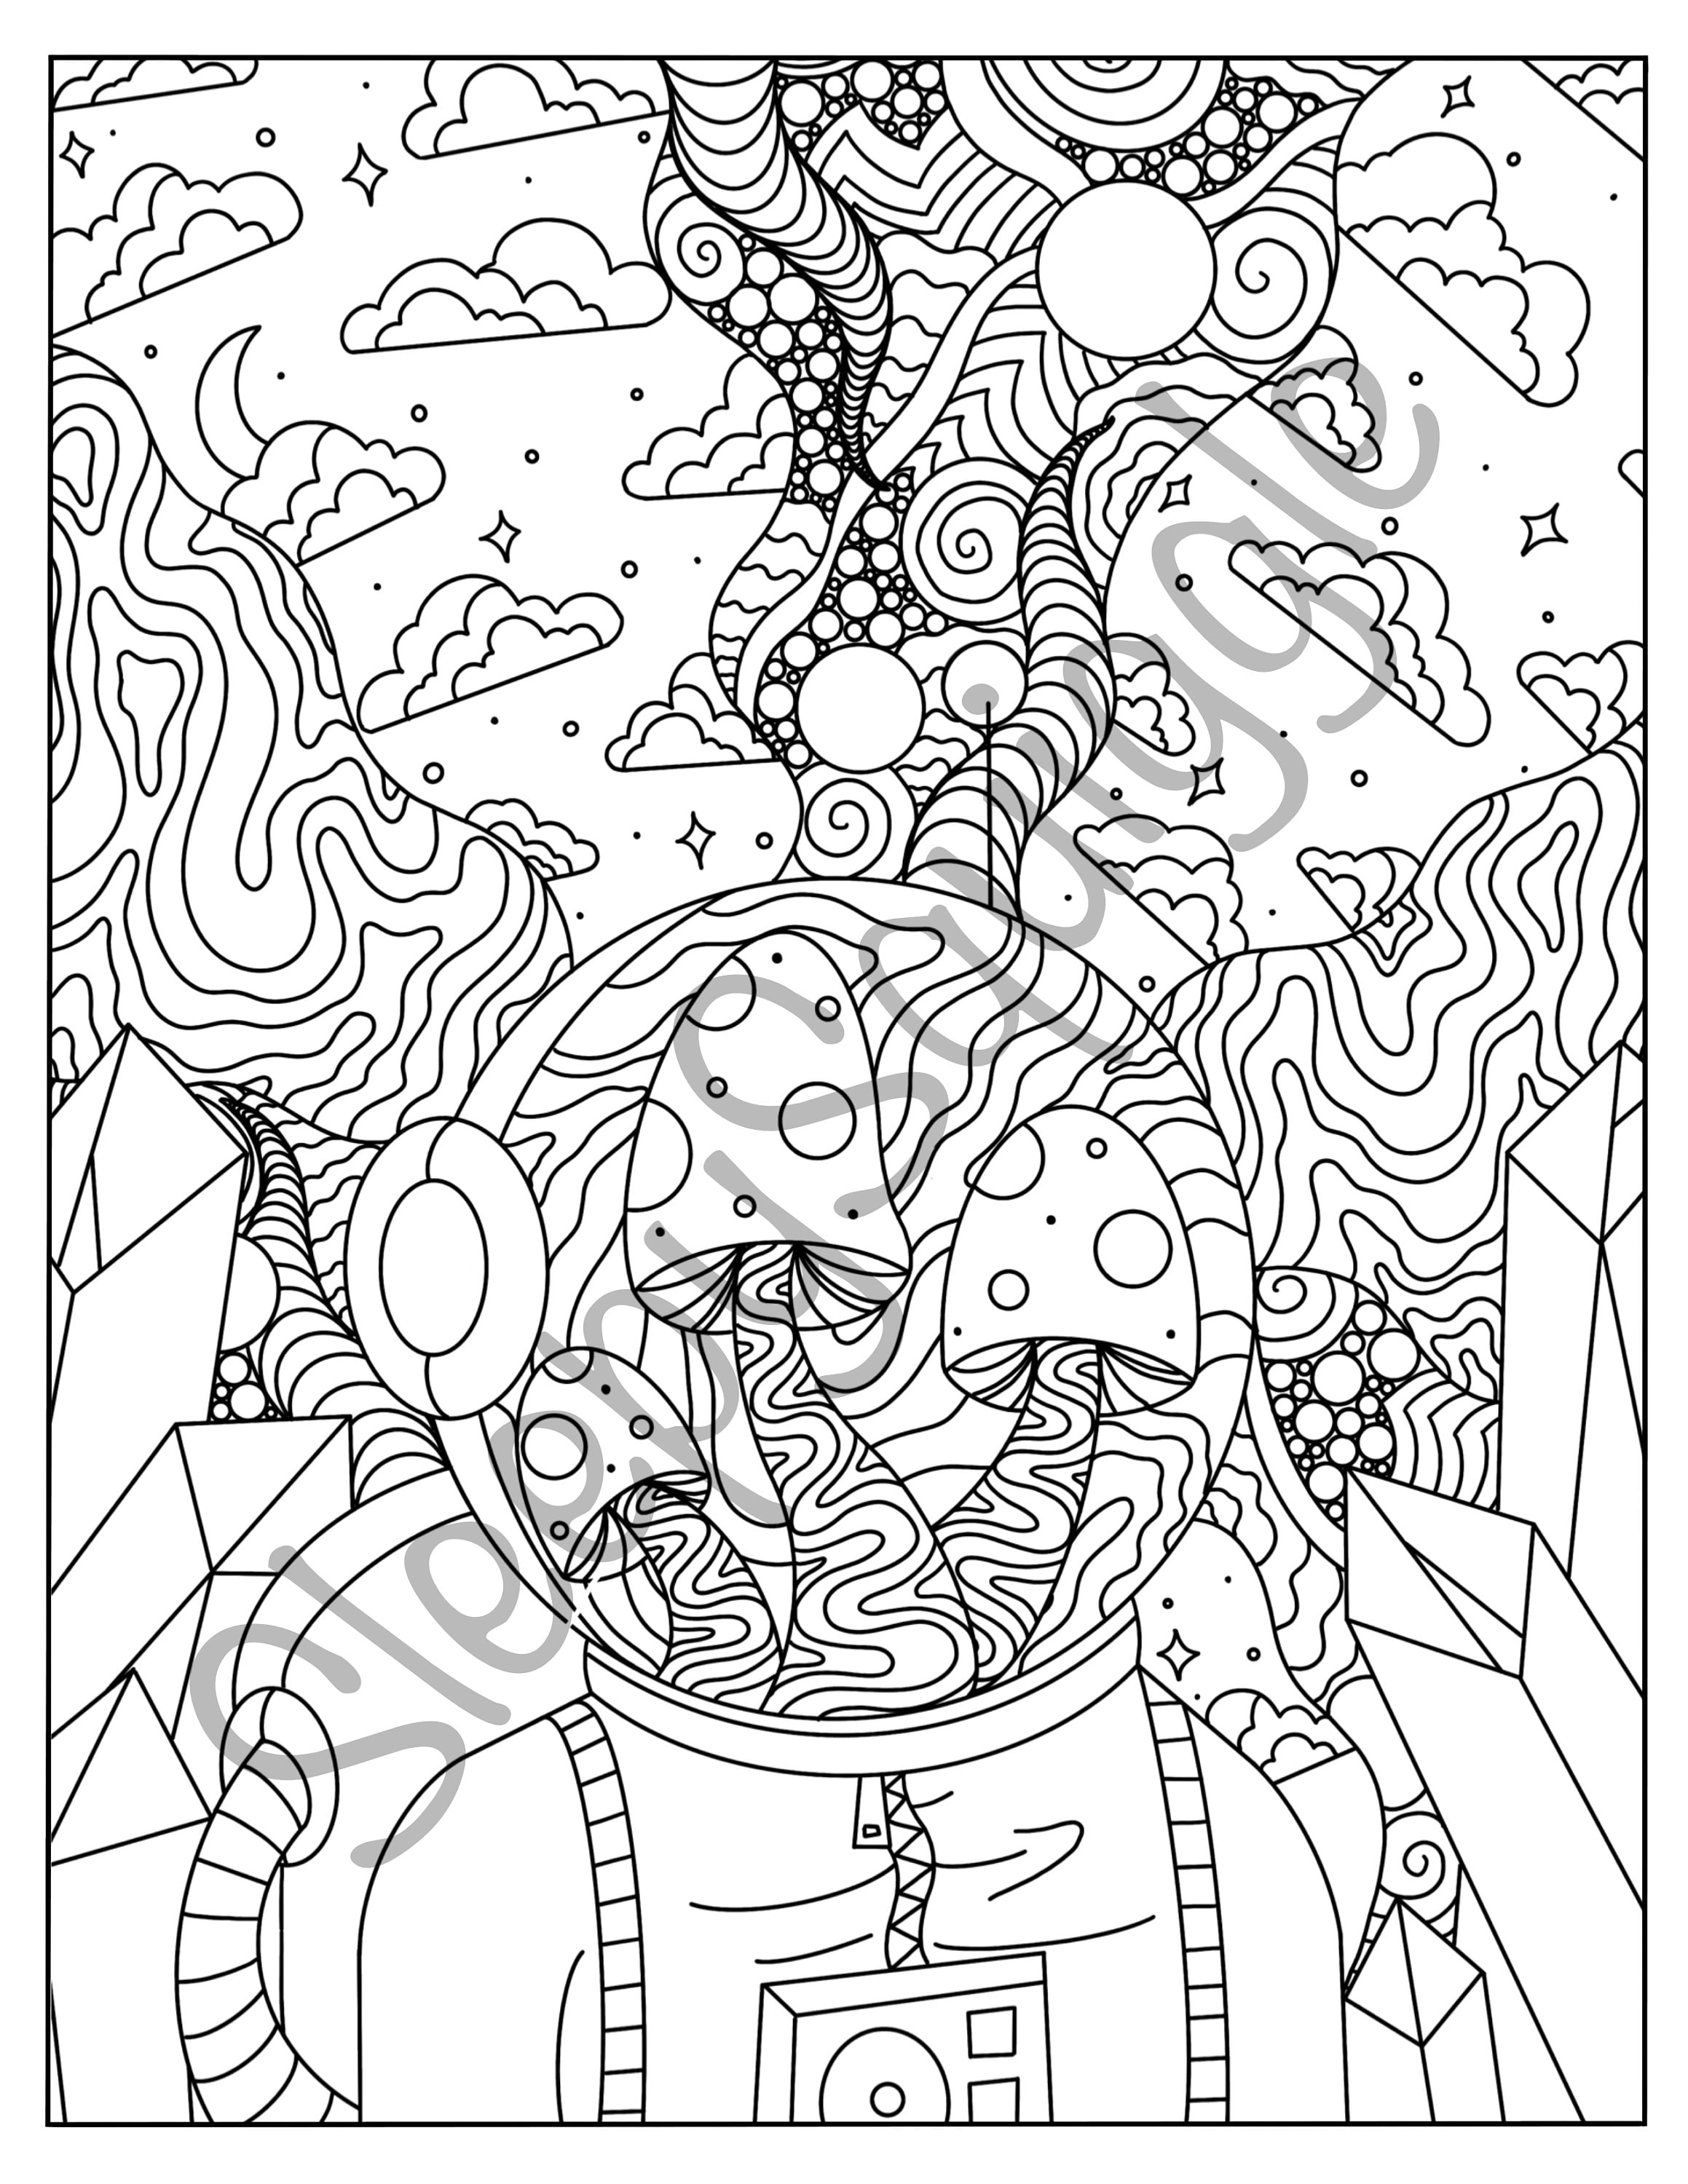 Eyeballs Everywhere: Psychedelic Coloring Book For Adults: Trippy Coloring Pages in a Psychedelic Coloring Book For Women and Consciousness Explorers [Book]